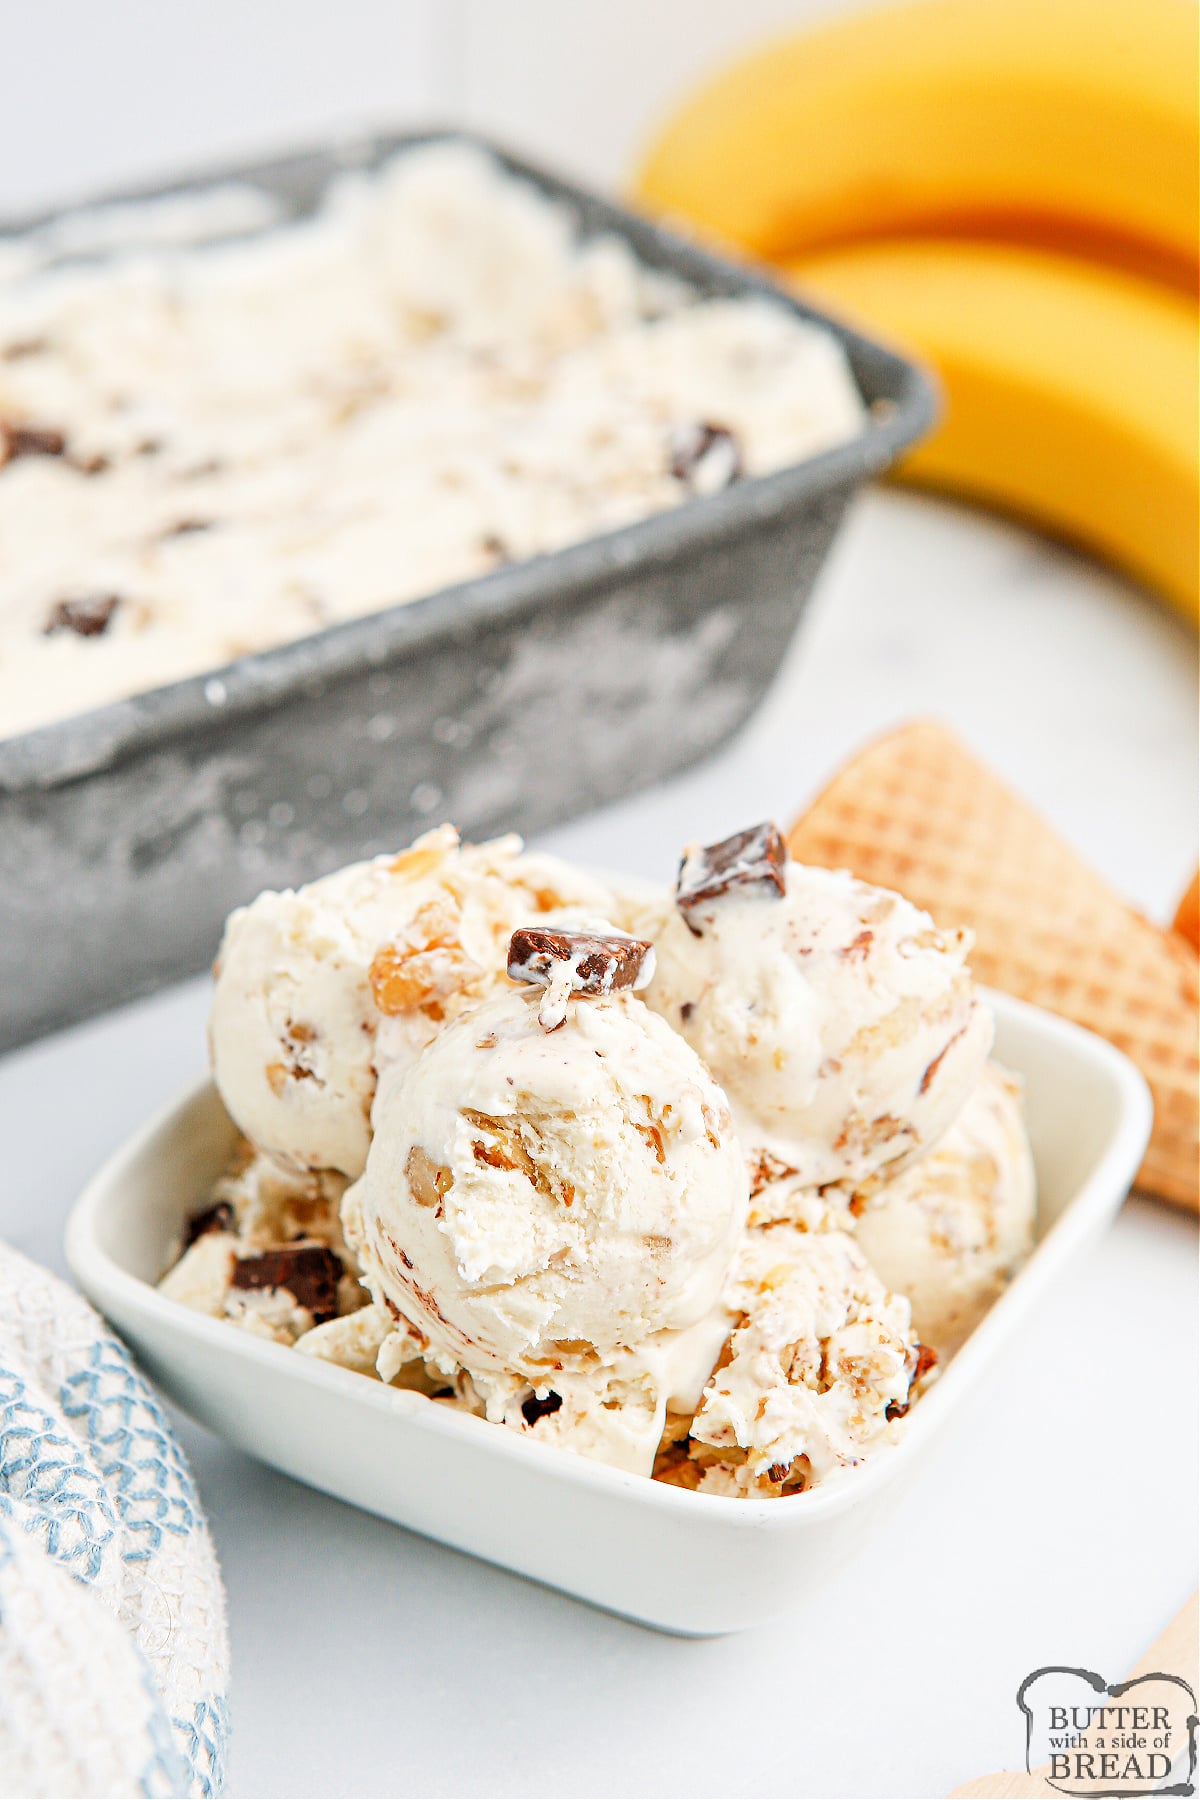 Chunky Monkey Ice Cream made with bananas, dark chocolate chunks and walnuts, no ice cream maker required. This rich, creamy version of the popular Ben & Jerry's ice cream is so easy to make!